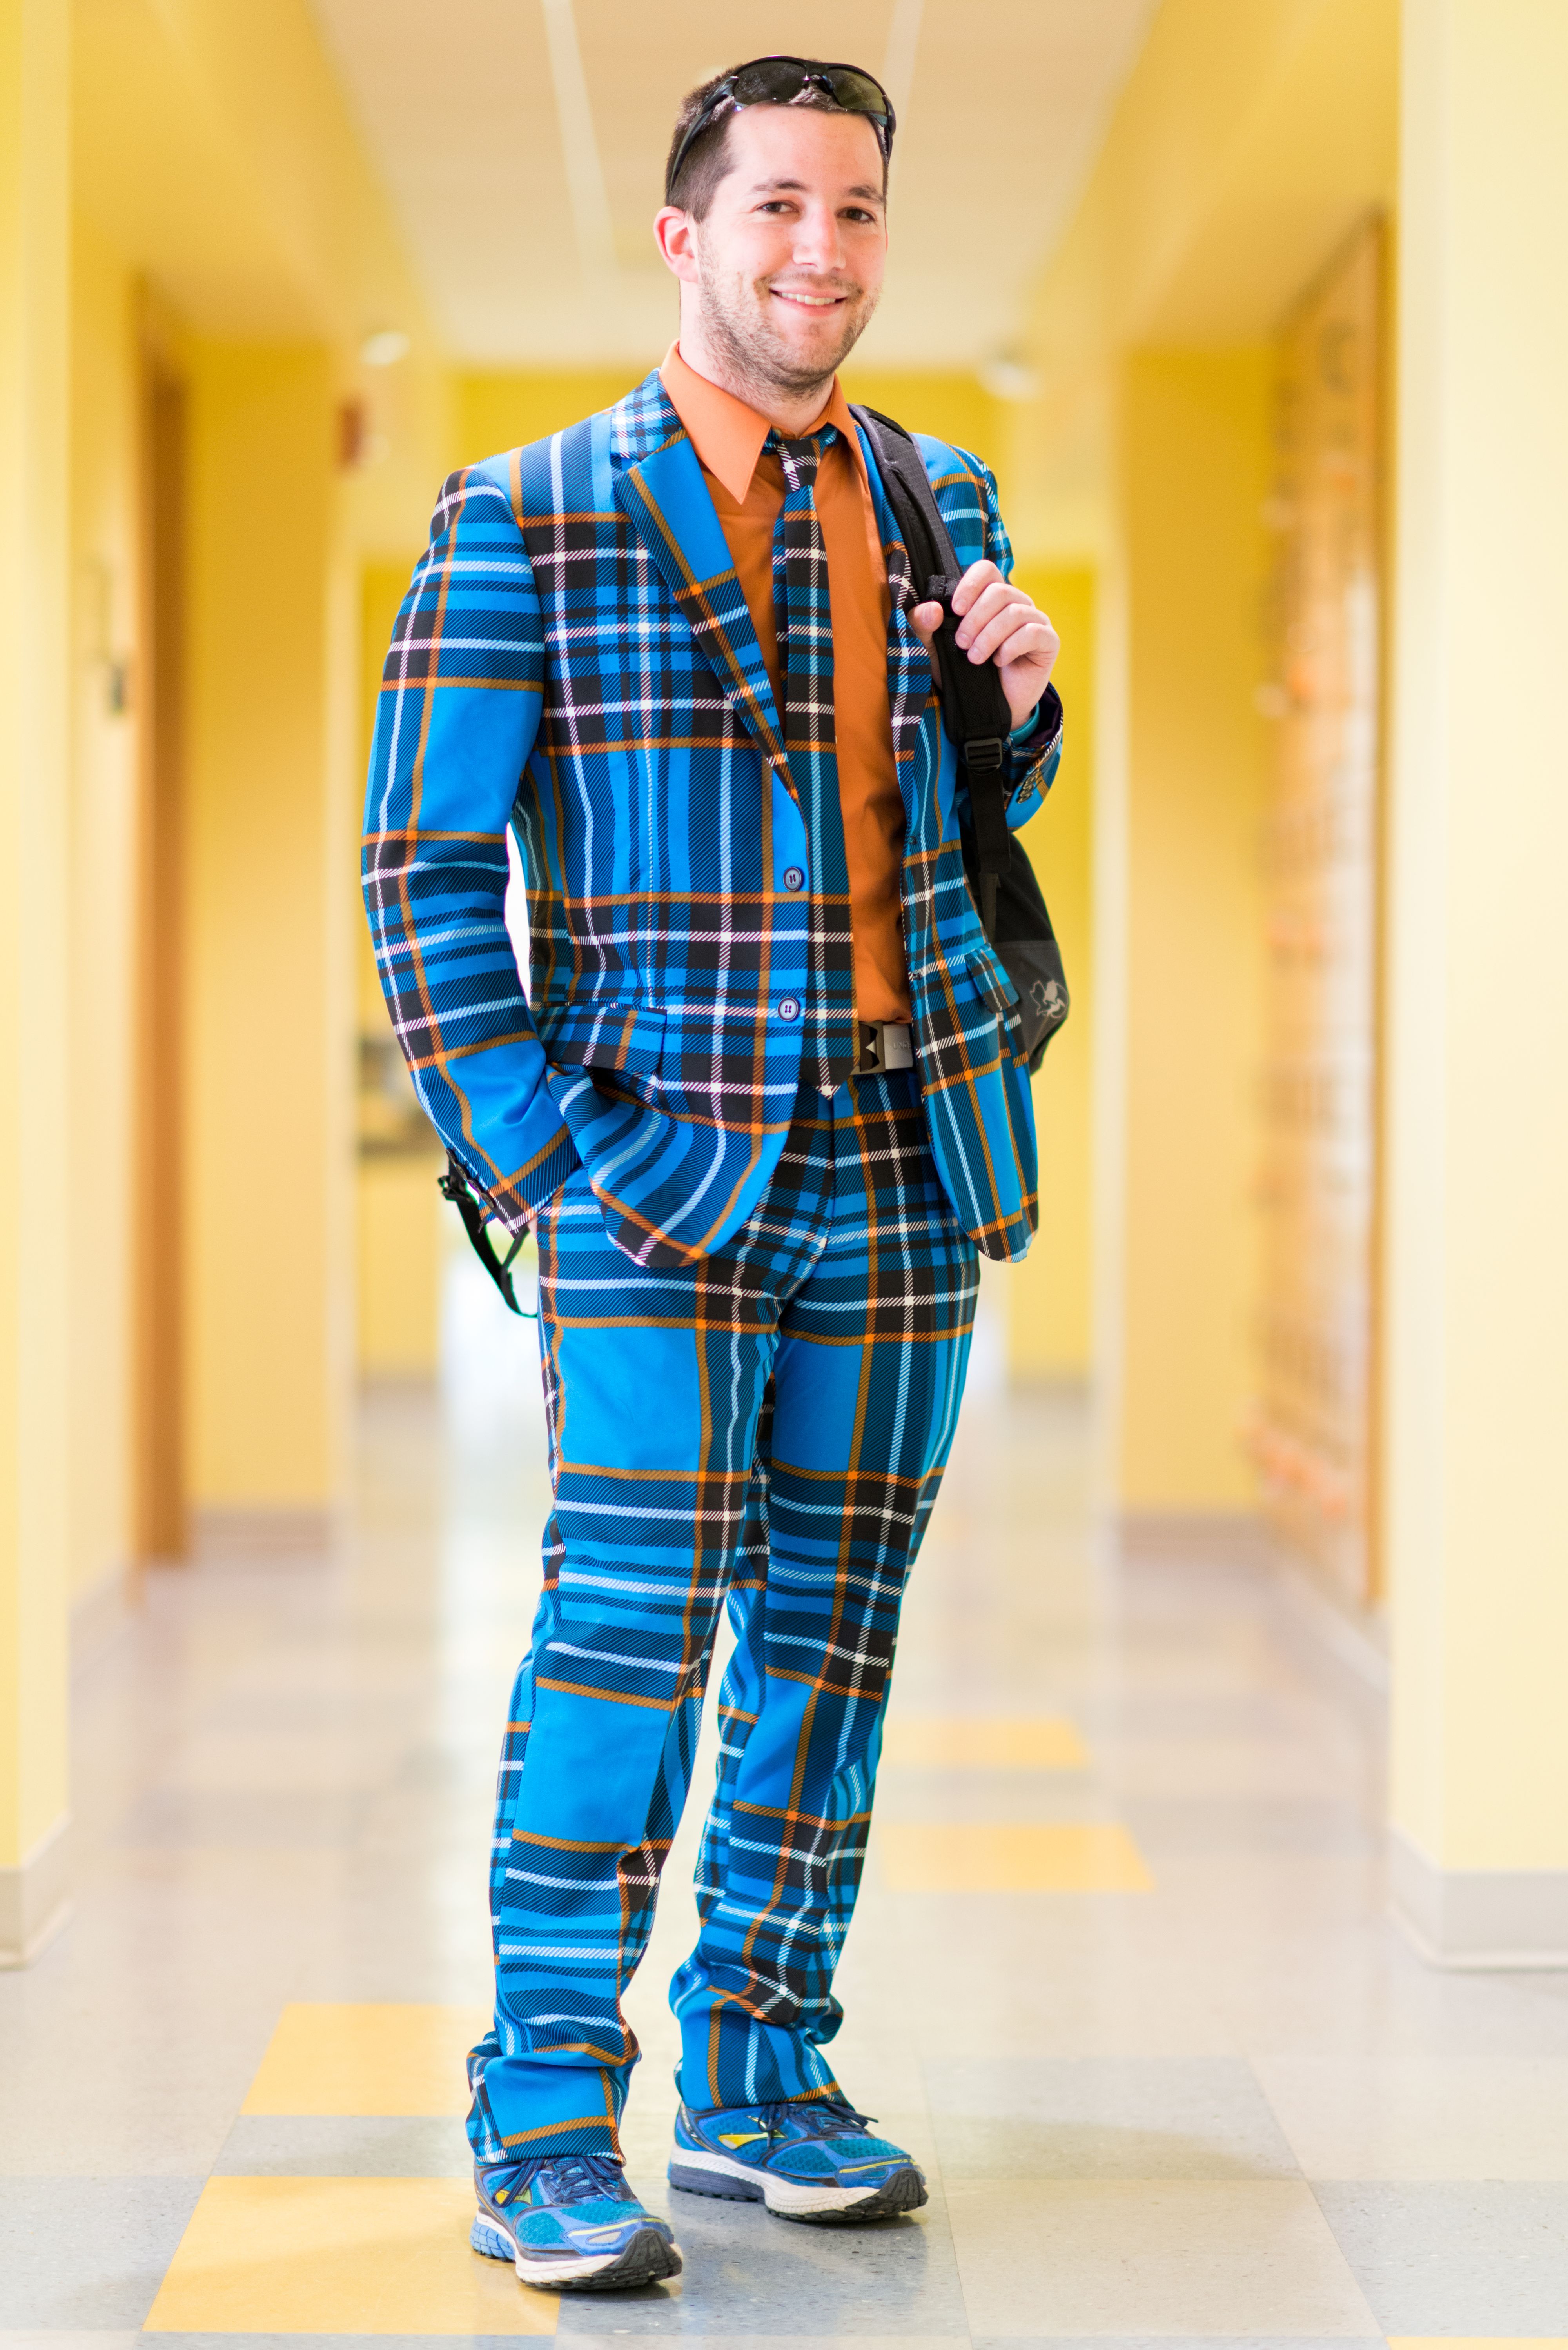 Portrait of male college student in hallway wearing blue plaid suit holding backpack